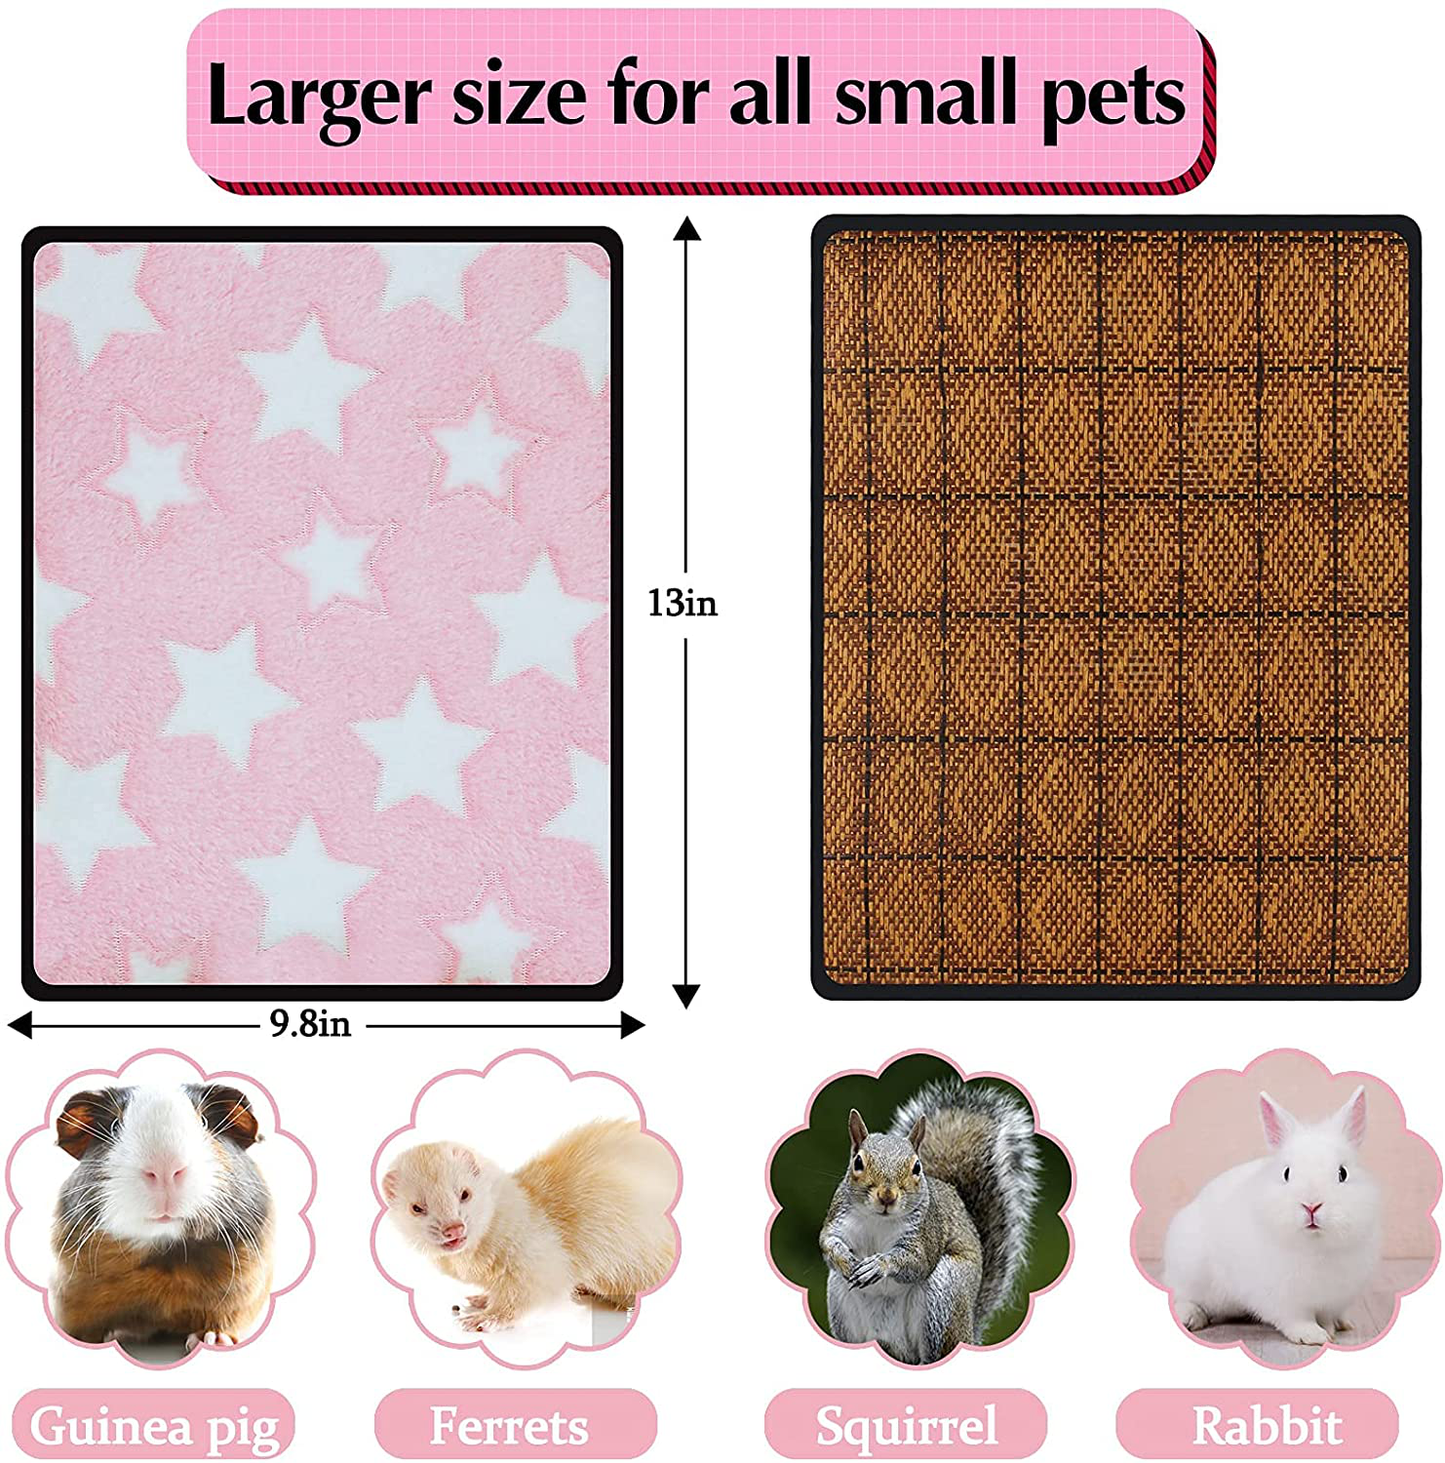 JCOLUSHI 3 Pieces of Hamster Bunny Guinea Pig Mat Cool in Summer and Warm in Winter,Guinea Pig Bed Hamster House Hamster Bunny Bed Guinea Pig Hideout Accessories Small Animal Bed Bunny Toys